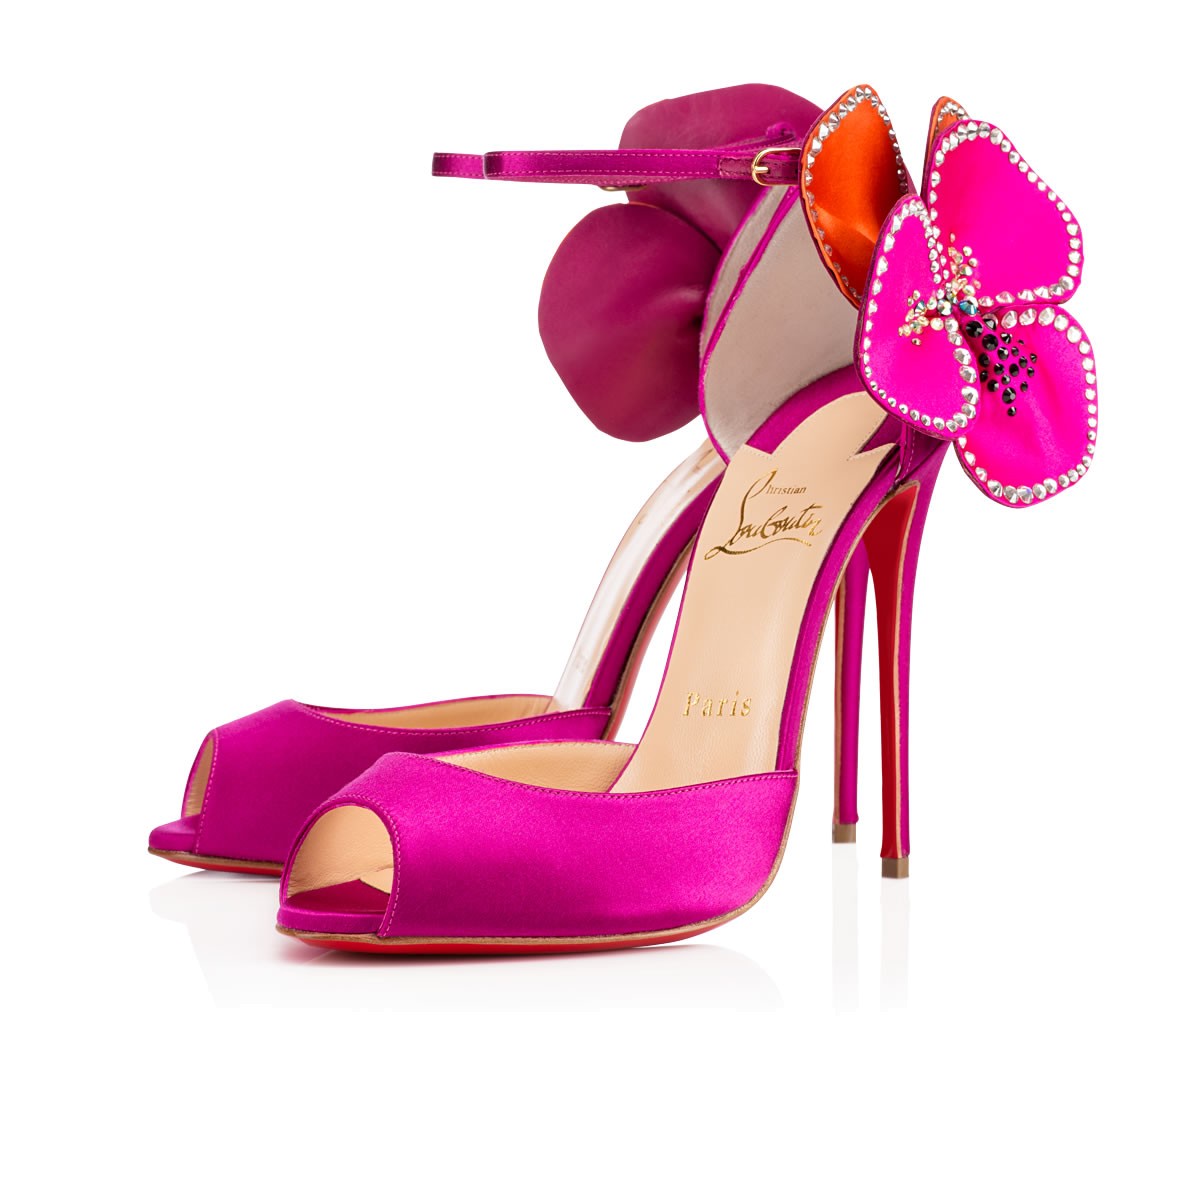 What's on your Christian Louboutin wish list? - My Fashion Wants